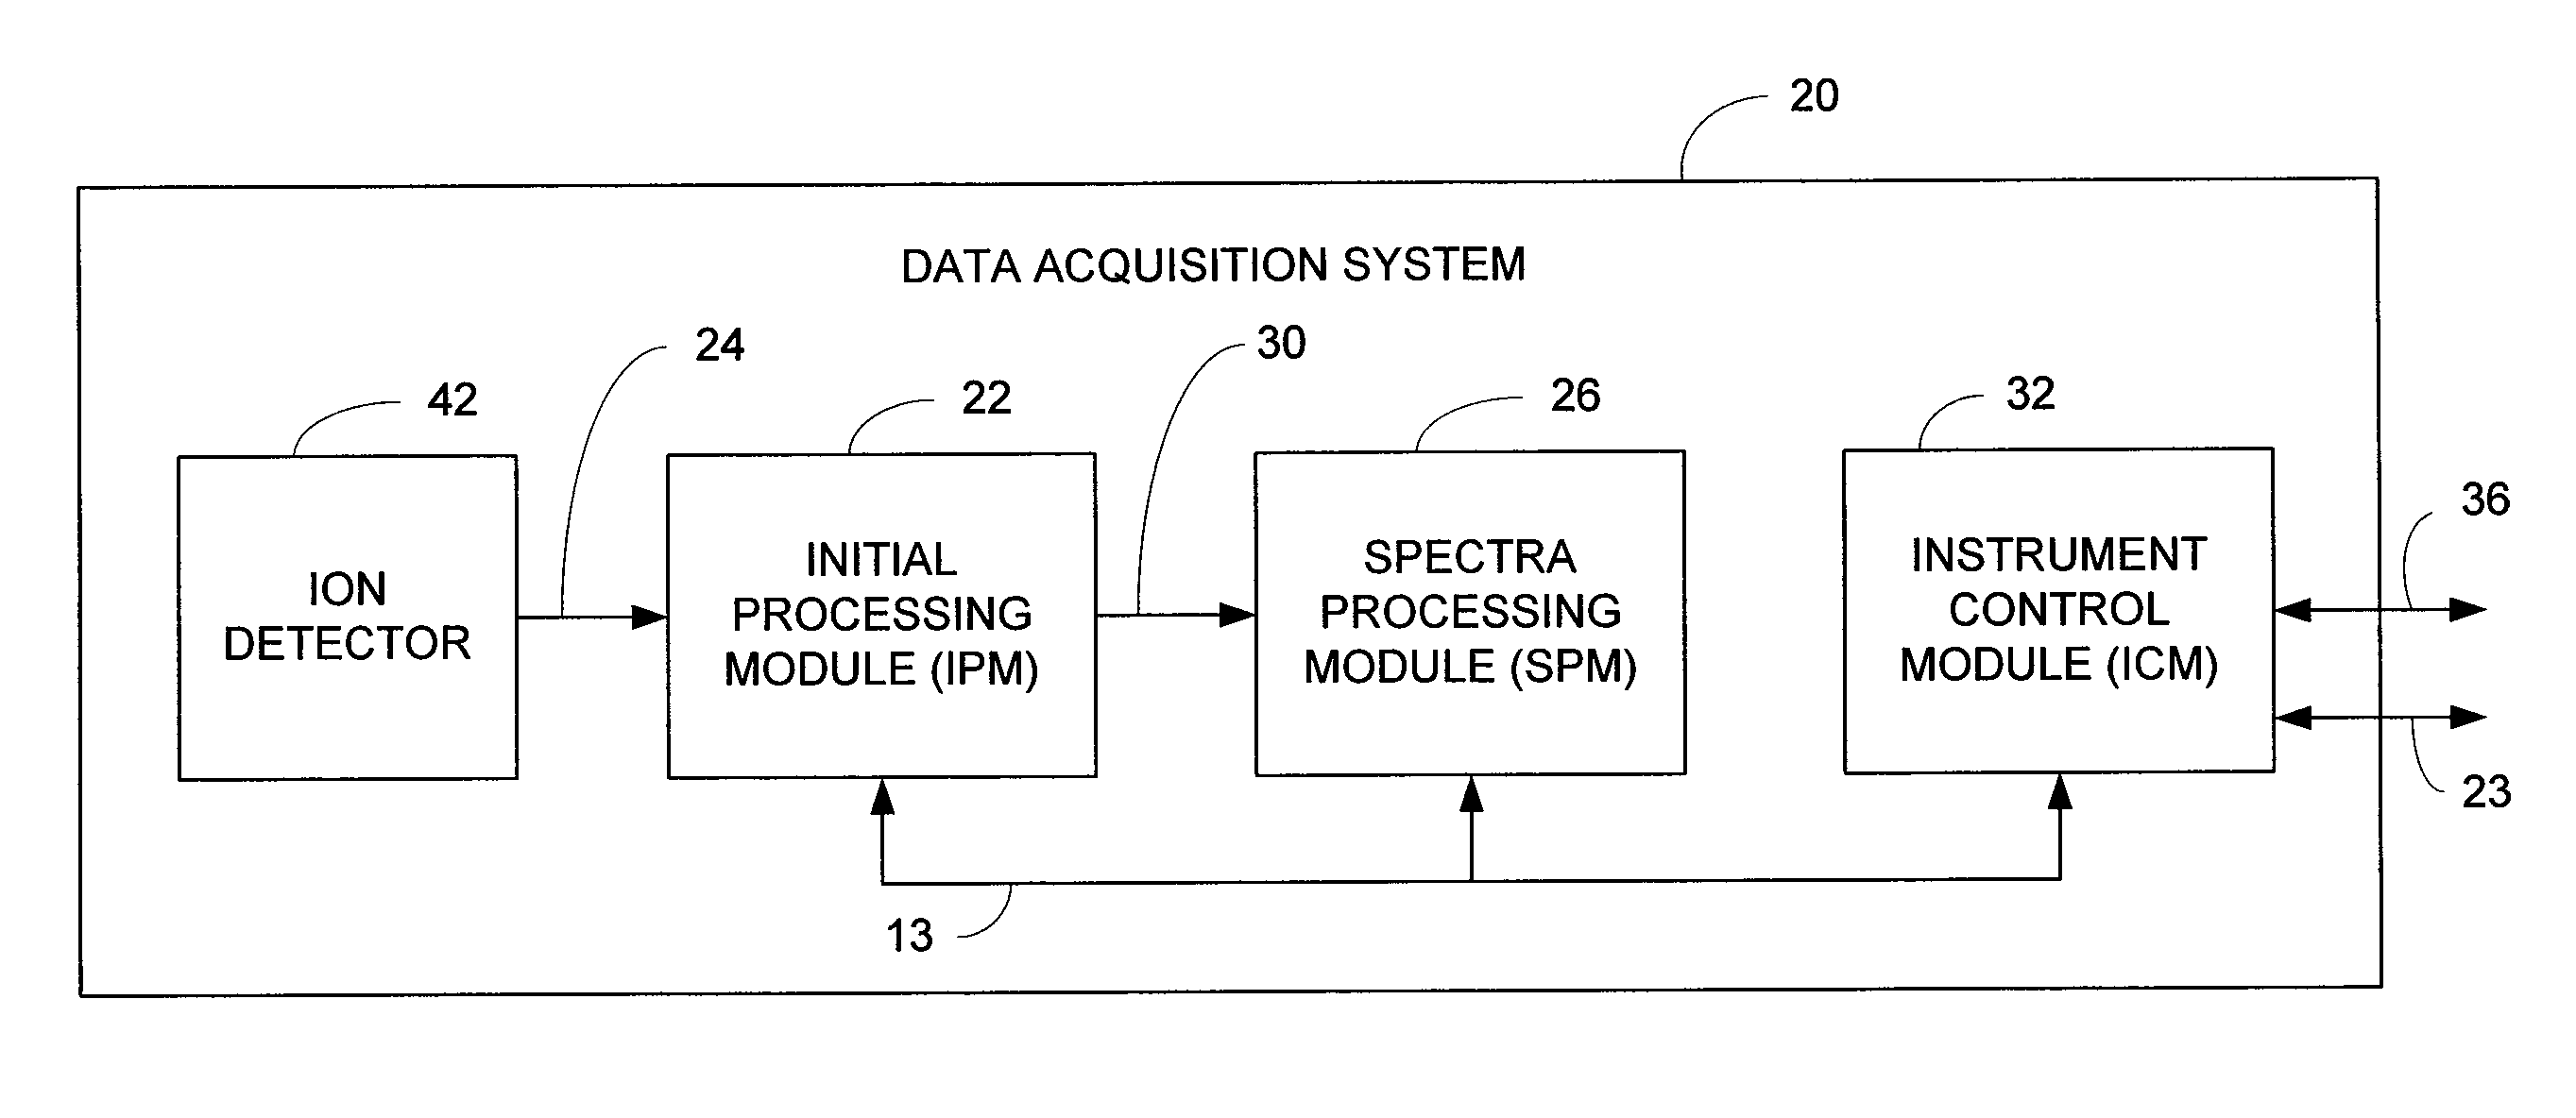 Data acquisition system for a spectrometer using an adaptive threshold